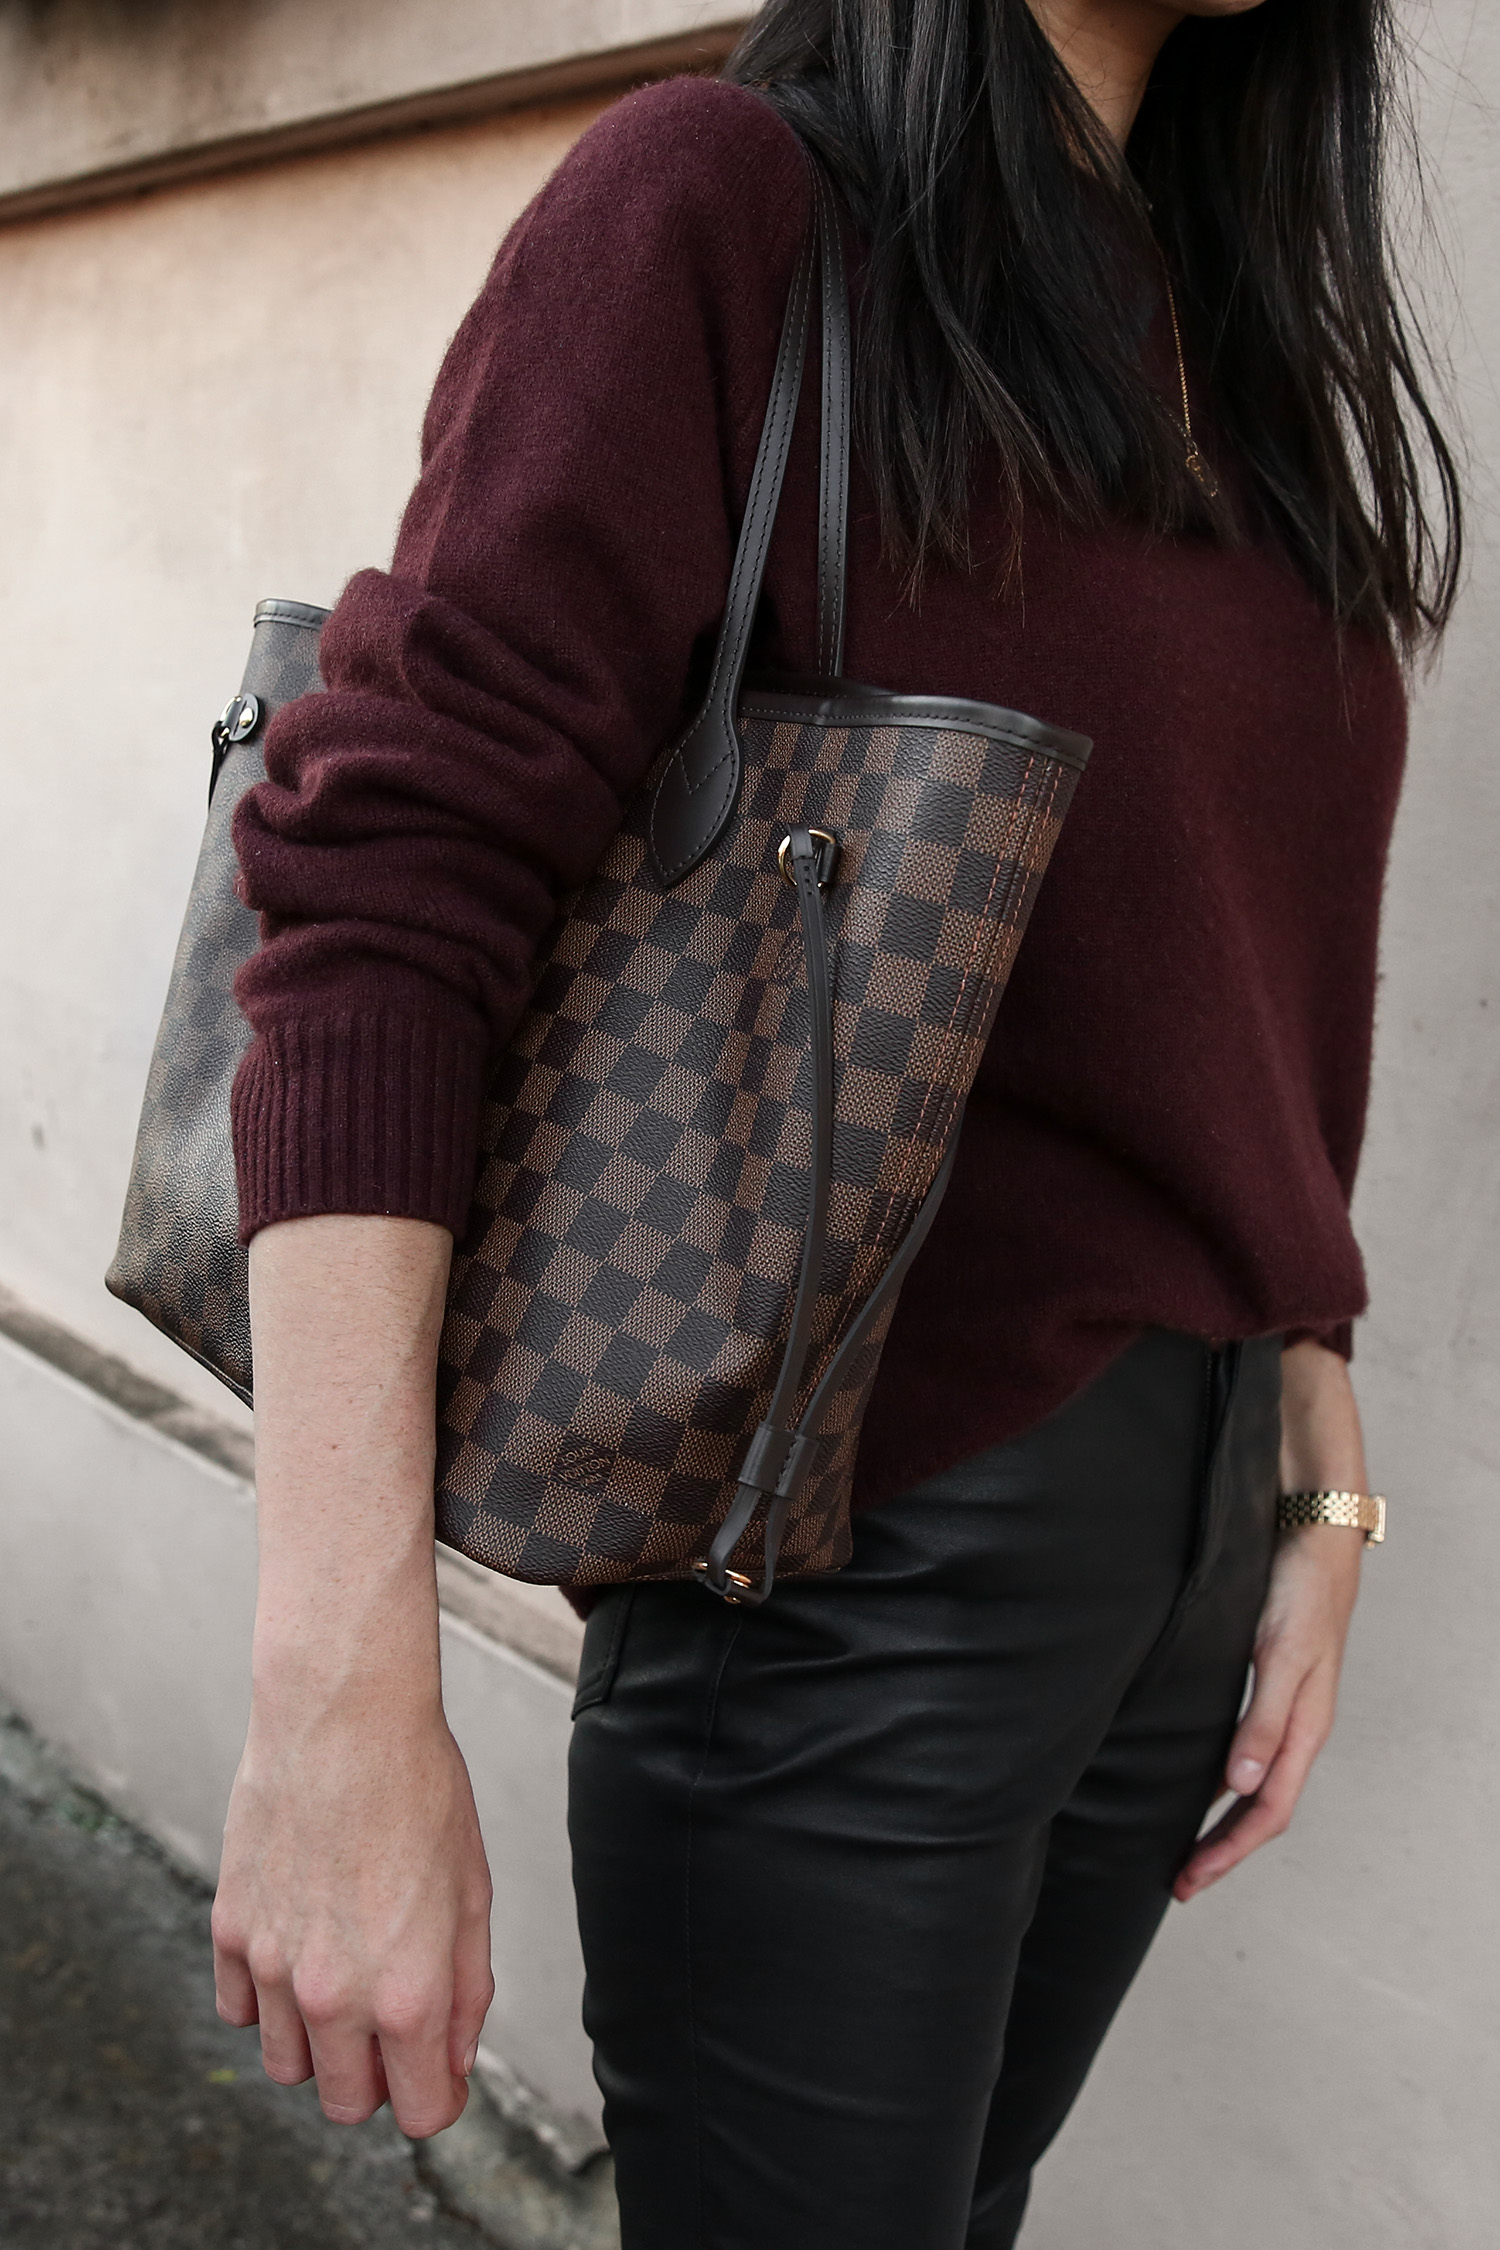 lv carryall outfit